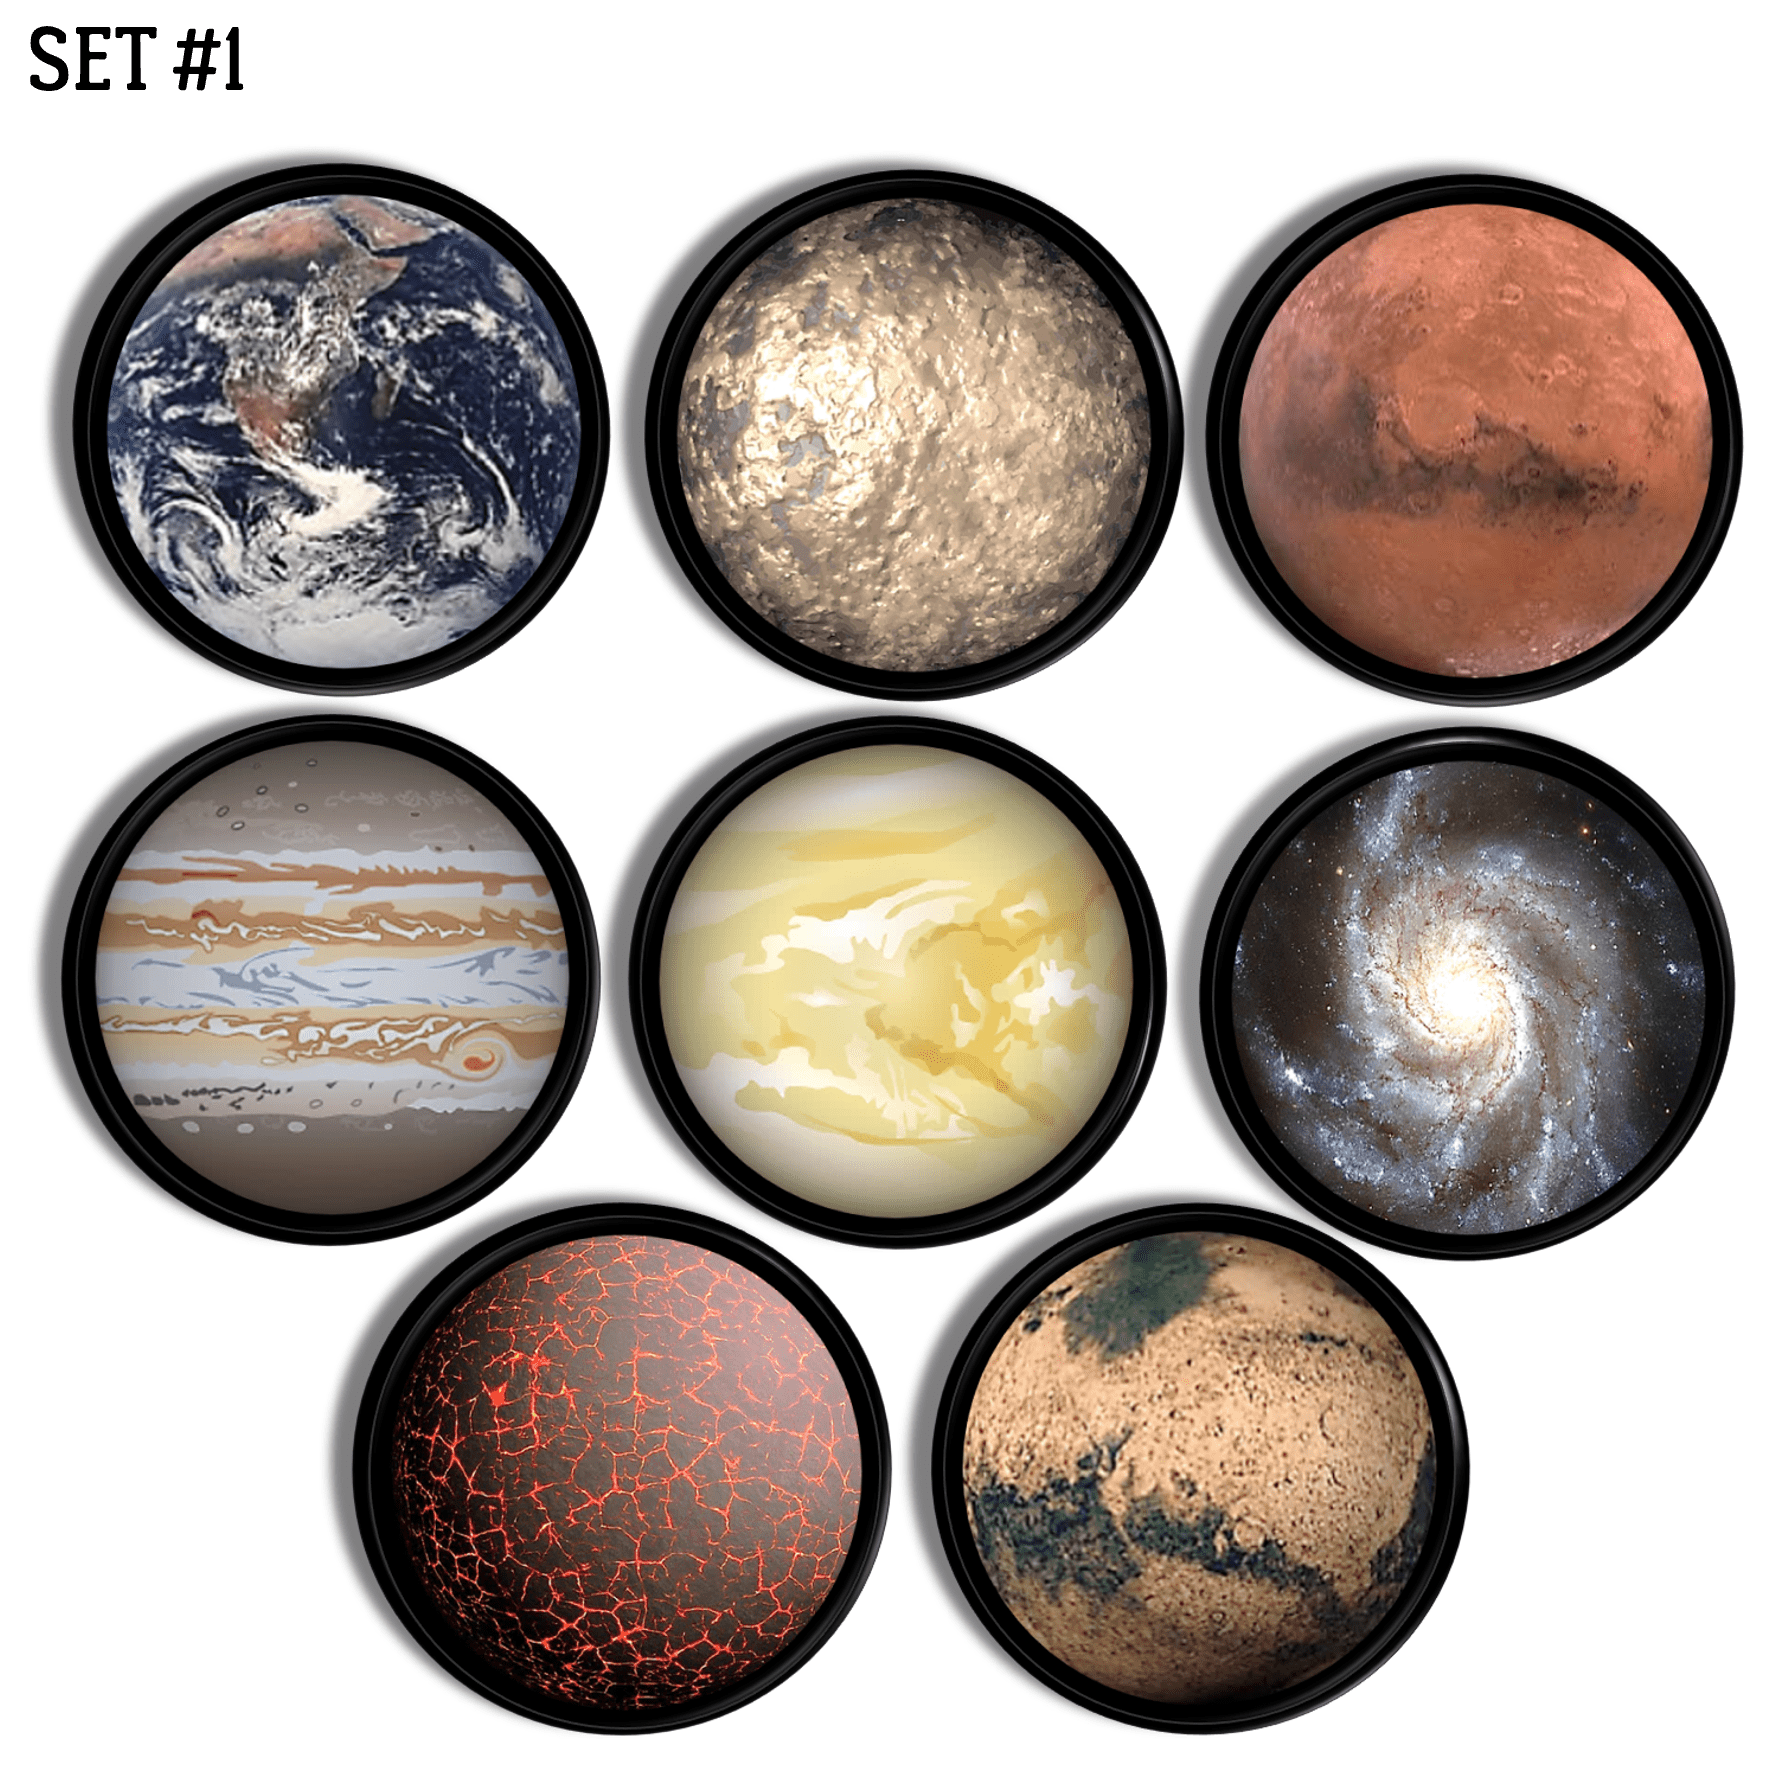 Set of 8 hand made solar system furniture knobs featuring the Milky Way, Earth, moon &amp; other planets in reds, blues &amp; golds.